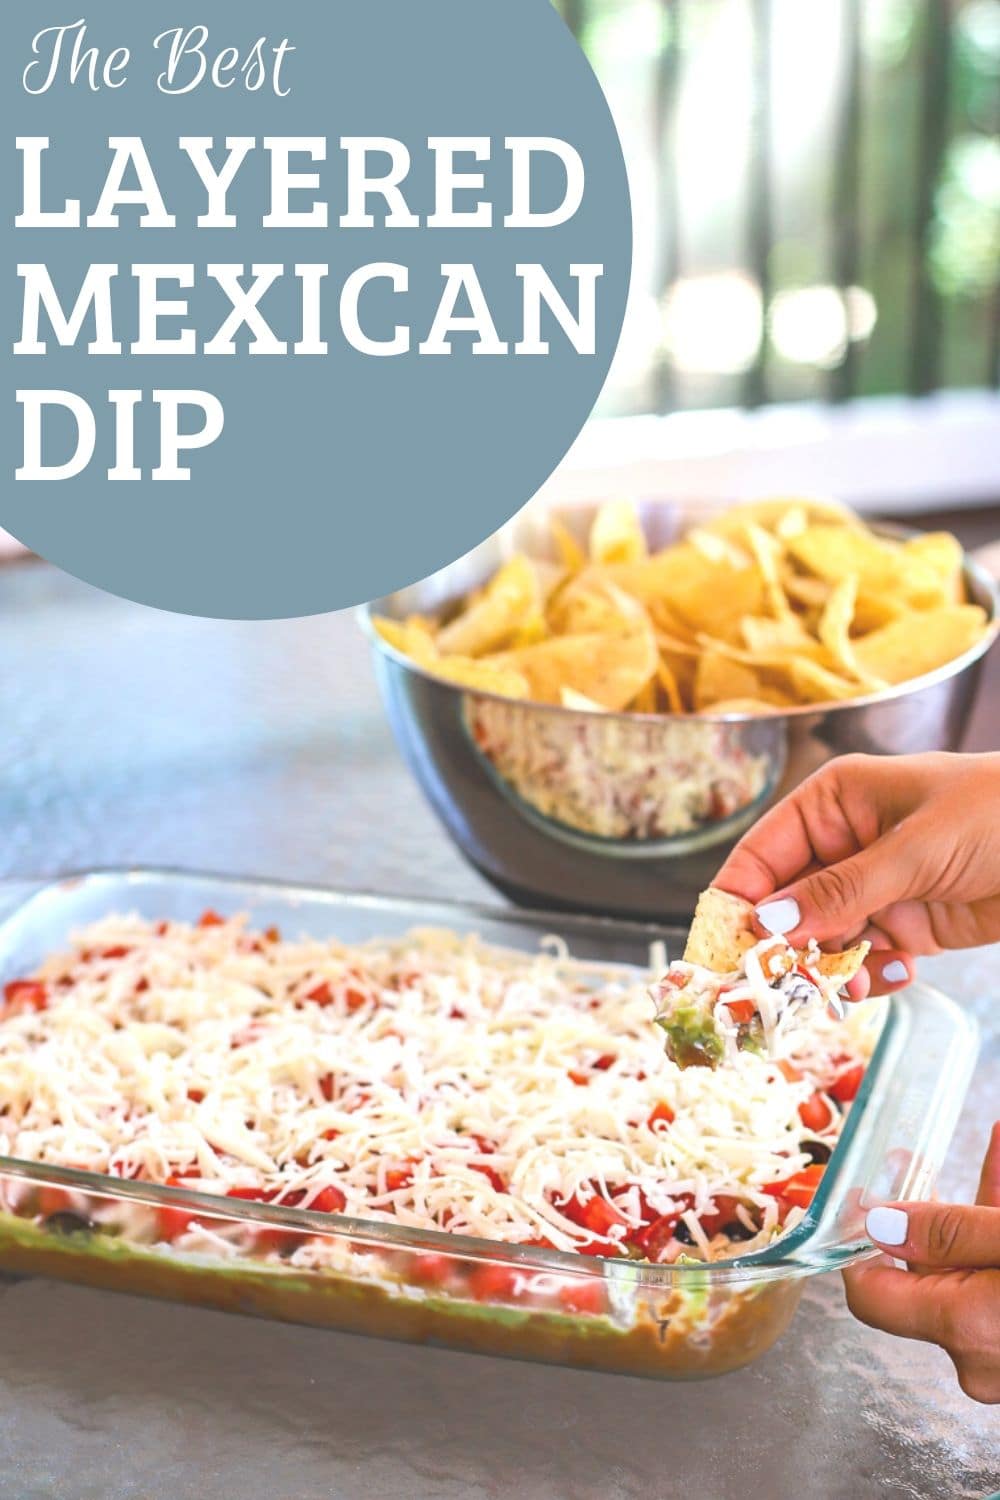 the best layered Mexican dip recipe- a healthy slice of life